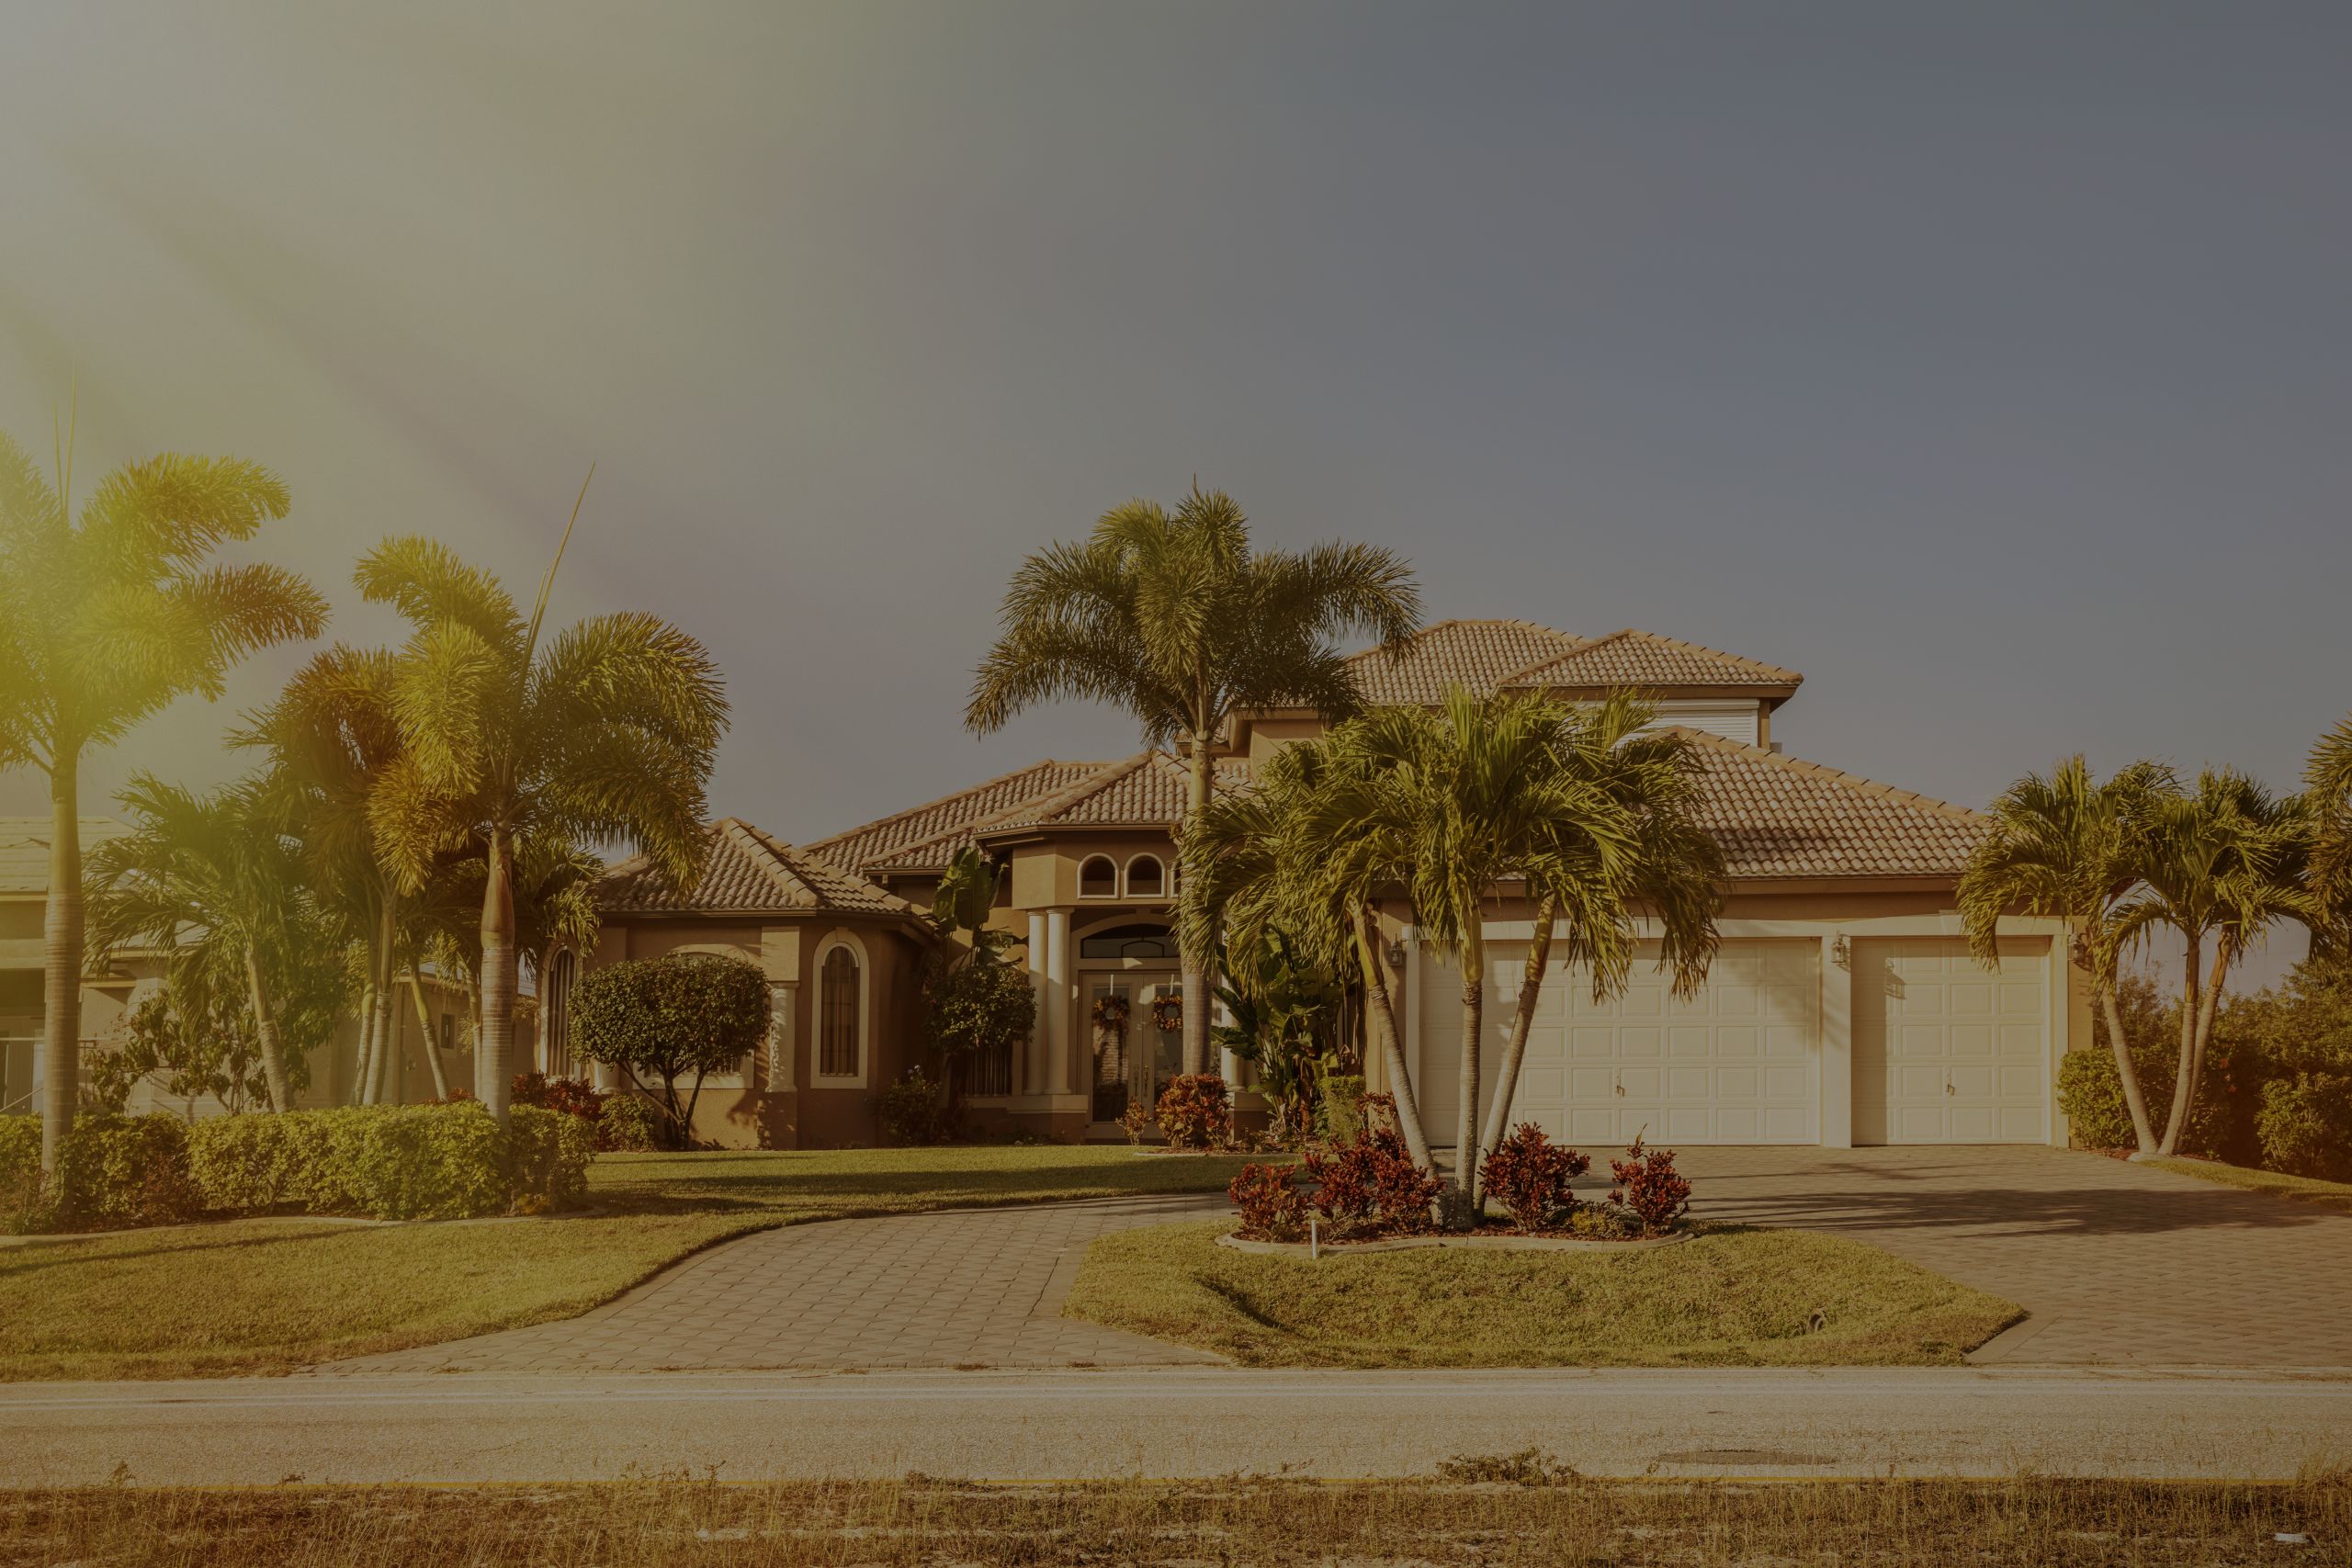 Boca Raton Real Estate Guide to Renting, Buying and Investing in Boca Raton Homes